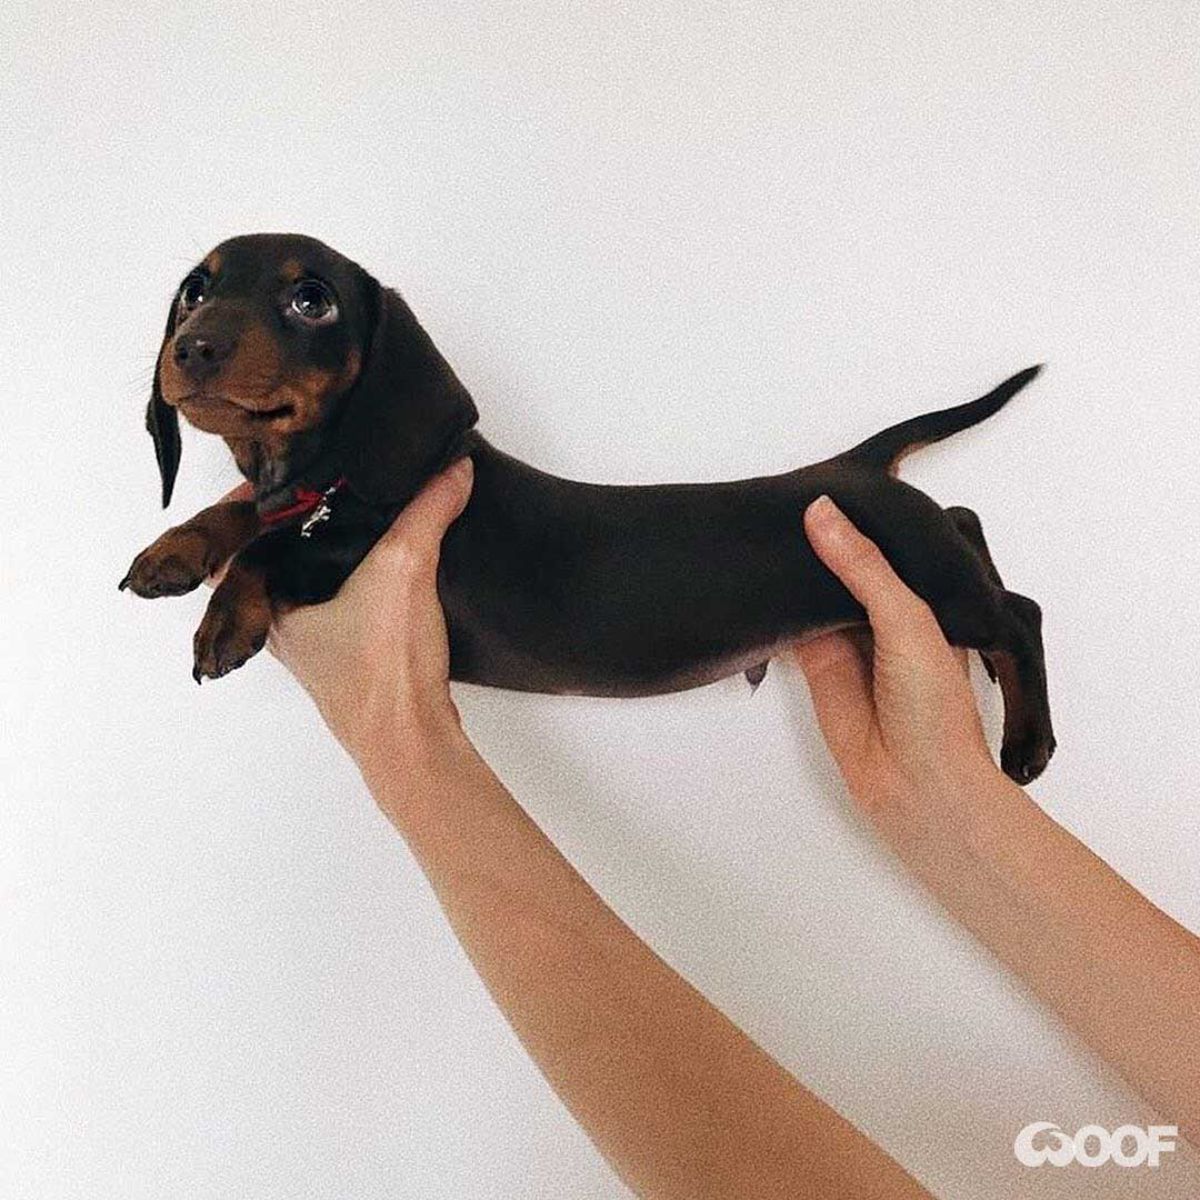 black and brown dachshund puppy held stretched out in someone's hands with the head to the left